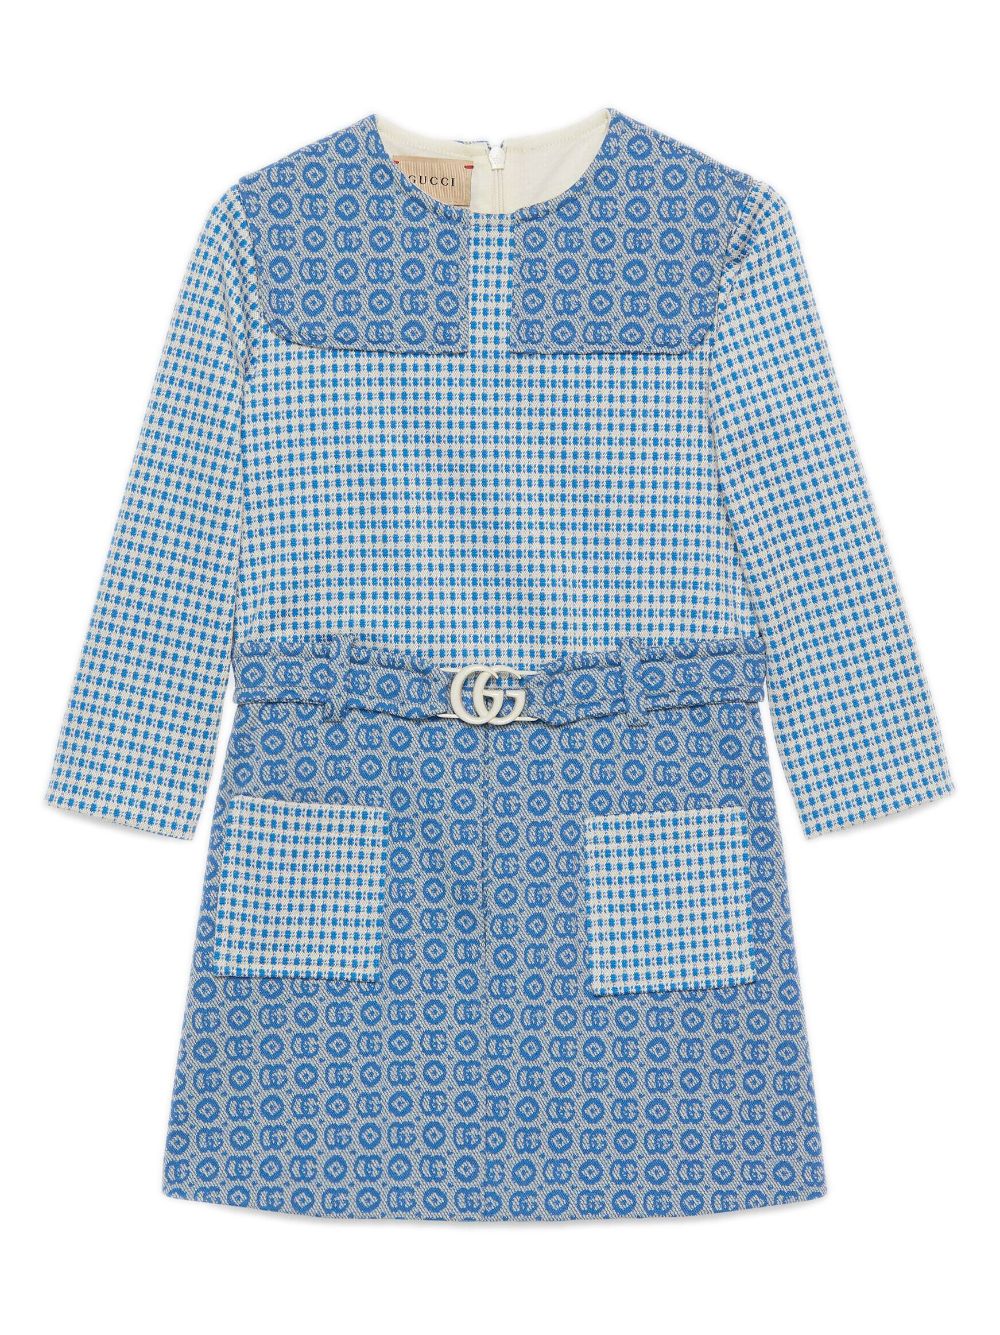 Gucci GG-motif Belted Playsuit - Farfetch